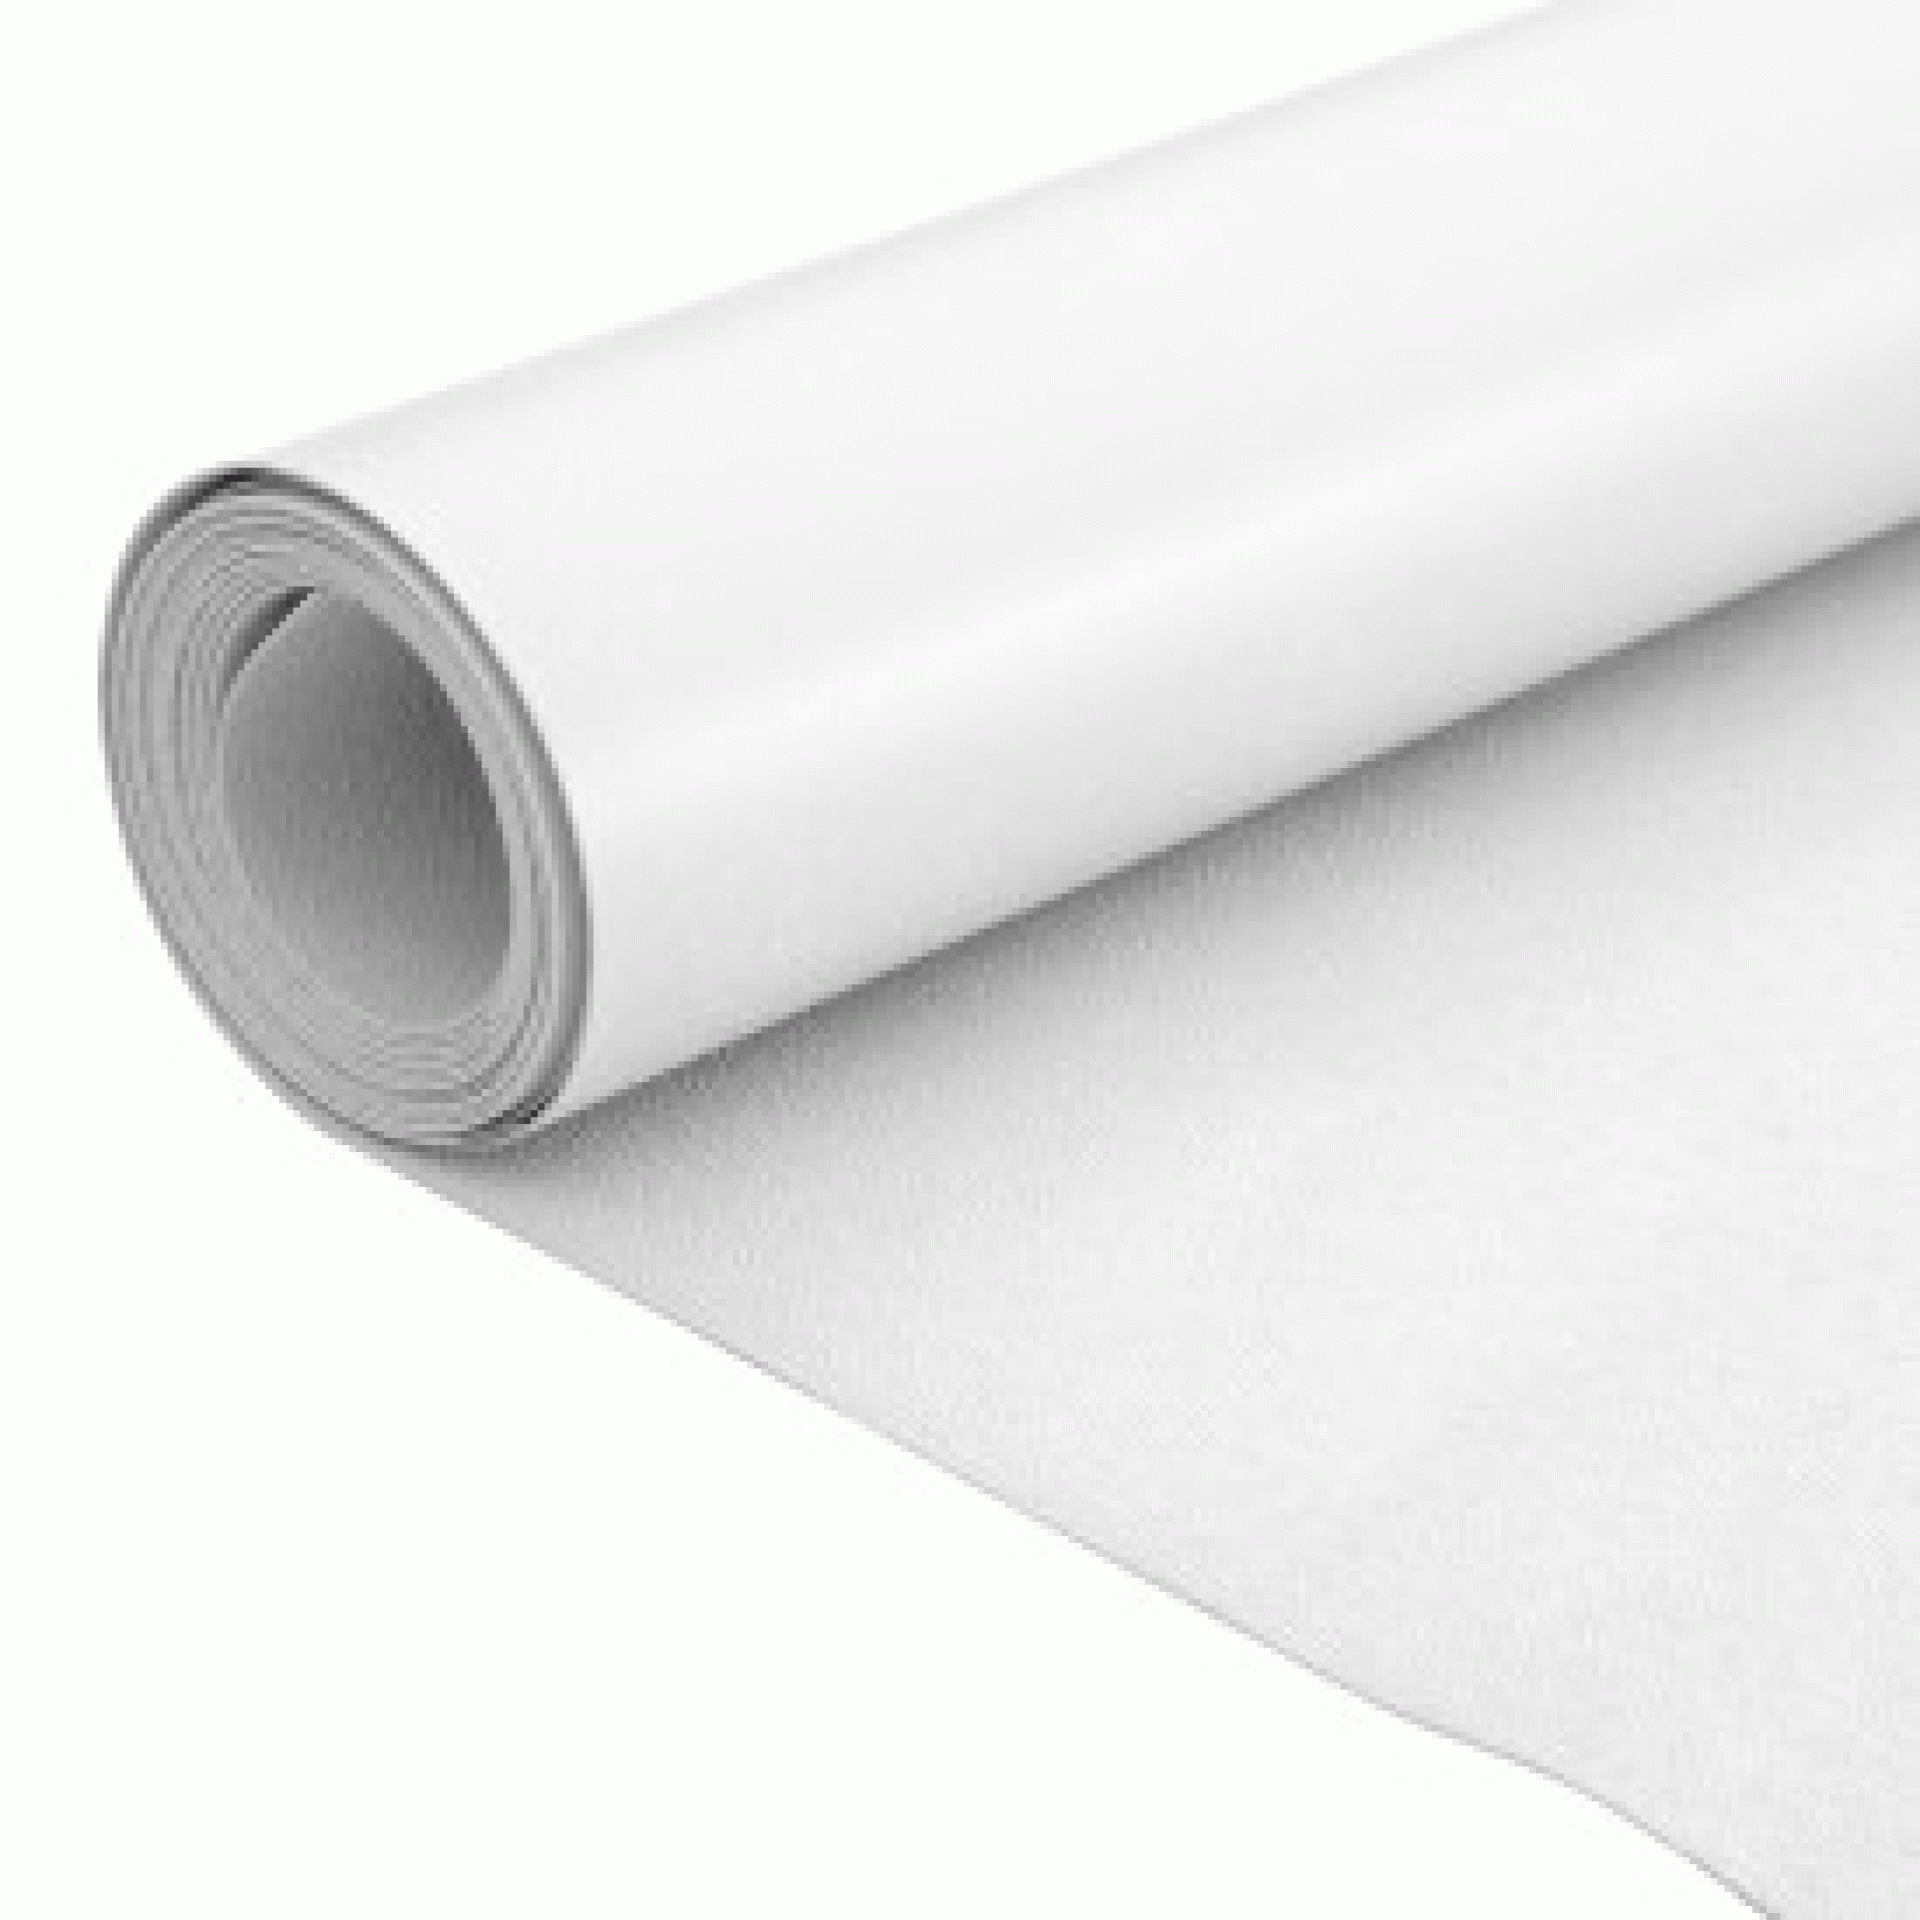 Lippert Components | 2020002605 | Alpha Roofing Membrane - 9.5' x 25' White